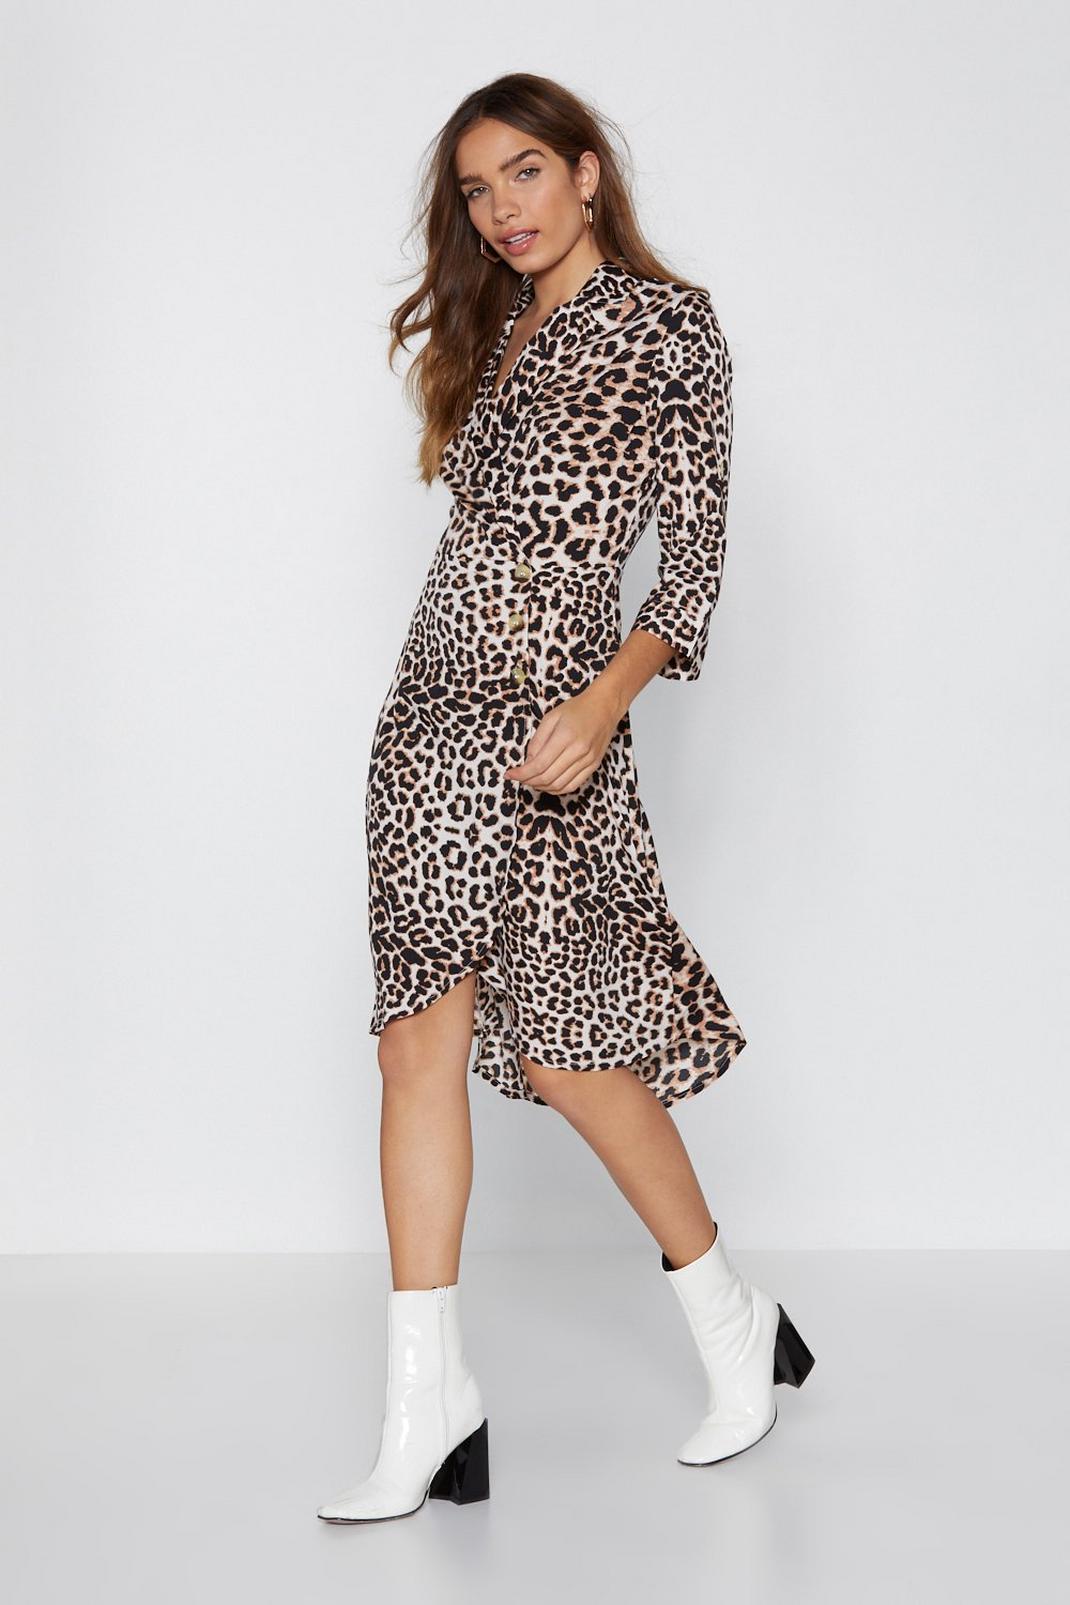 Tail Me Something I Don't Know Leopard Dress image number 1